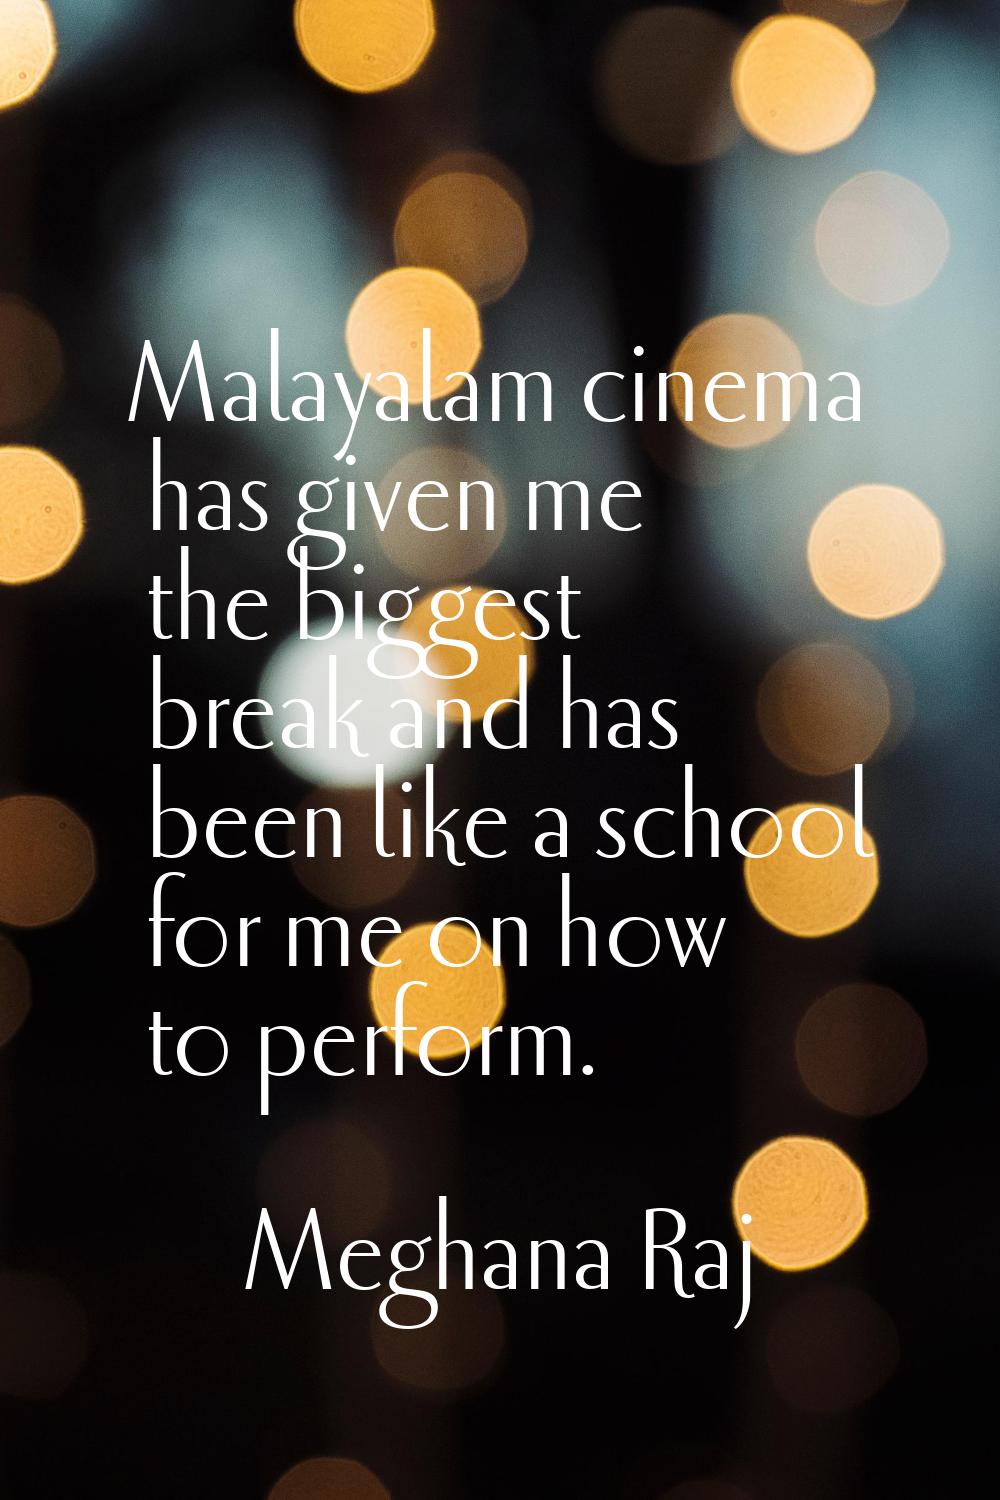 Malayalam cinema has given me the biggest break and has been like a school for me on how to perform